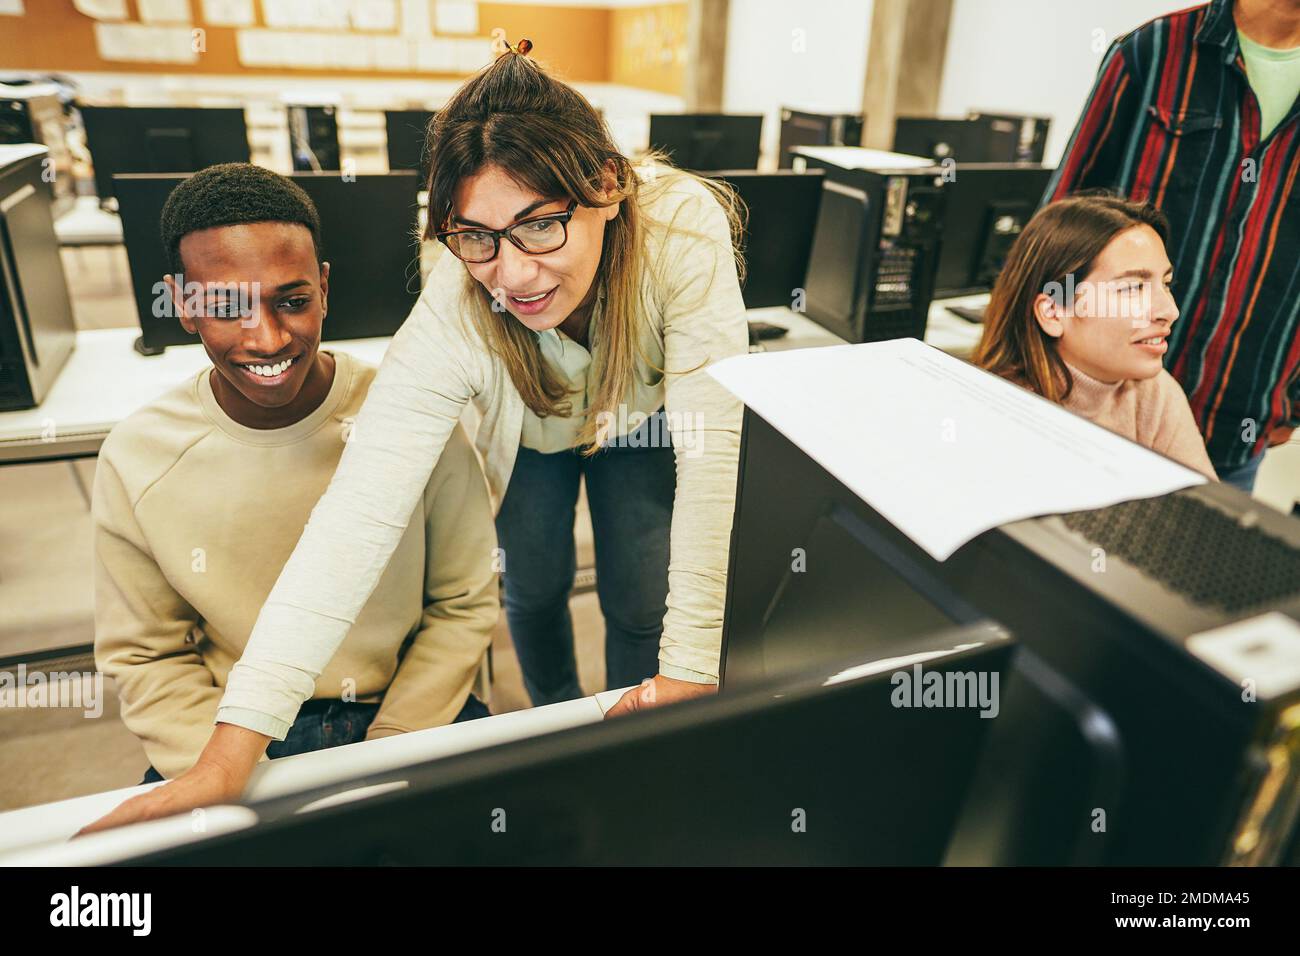 Teacher working with students inside computer class room - Focus on mature woman face Stock Photo